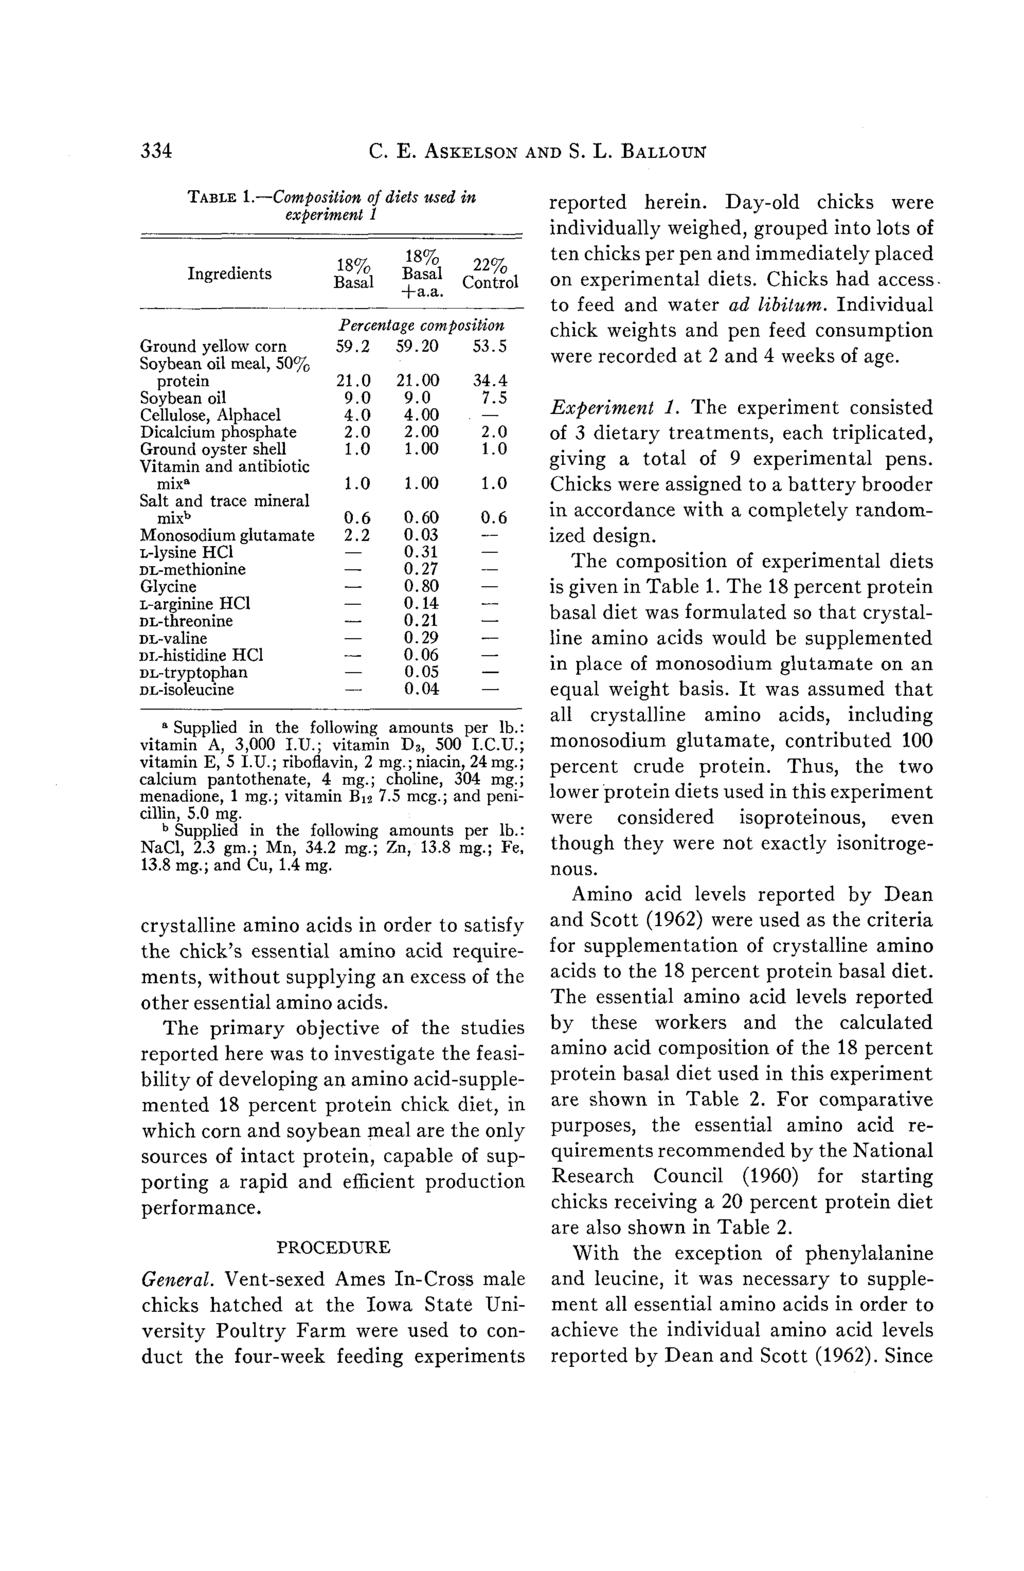 334 C. E. ASKELSON AND S. L. BALLOUN TABLE 1. Composition of diets used in experiment 1 Ingredients & ^ +a.